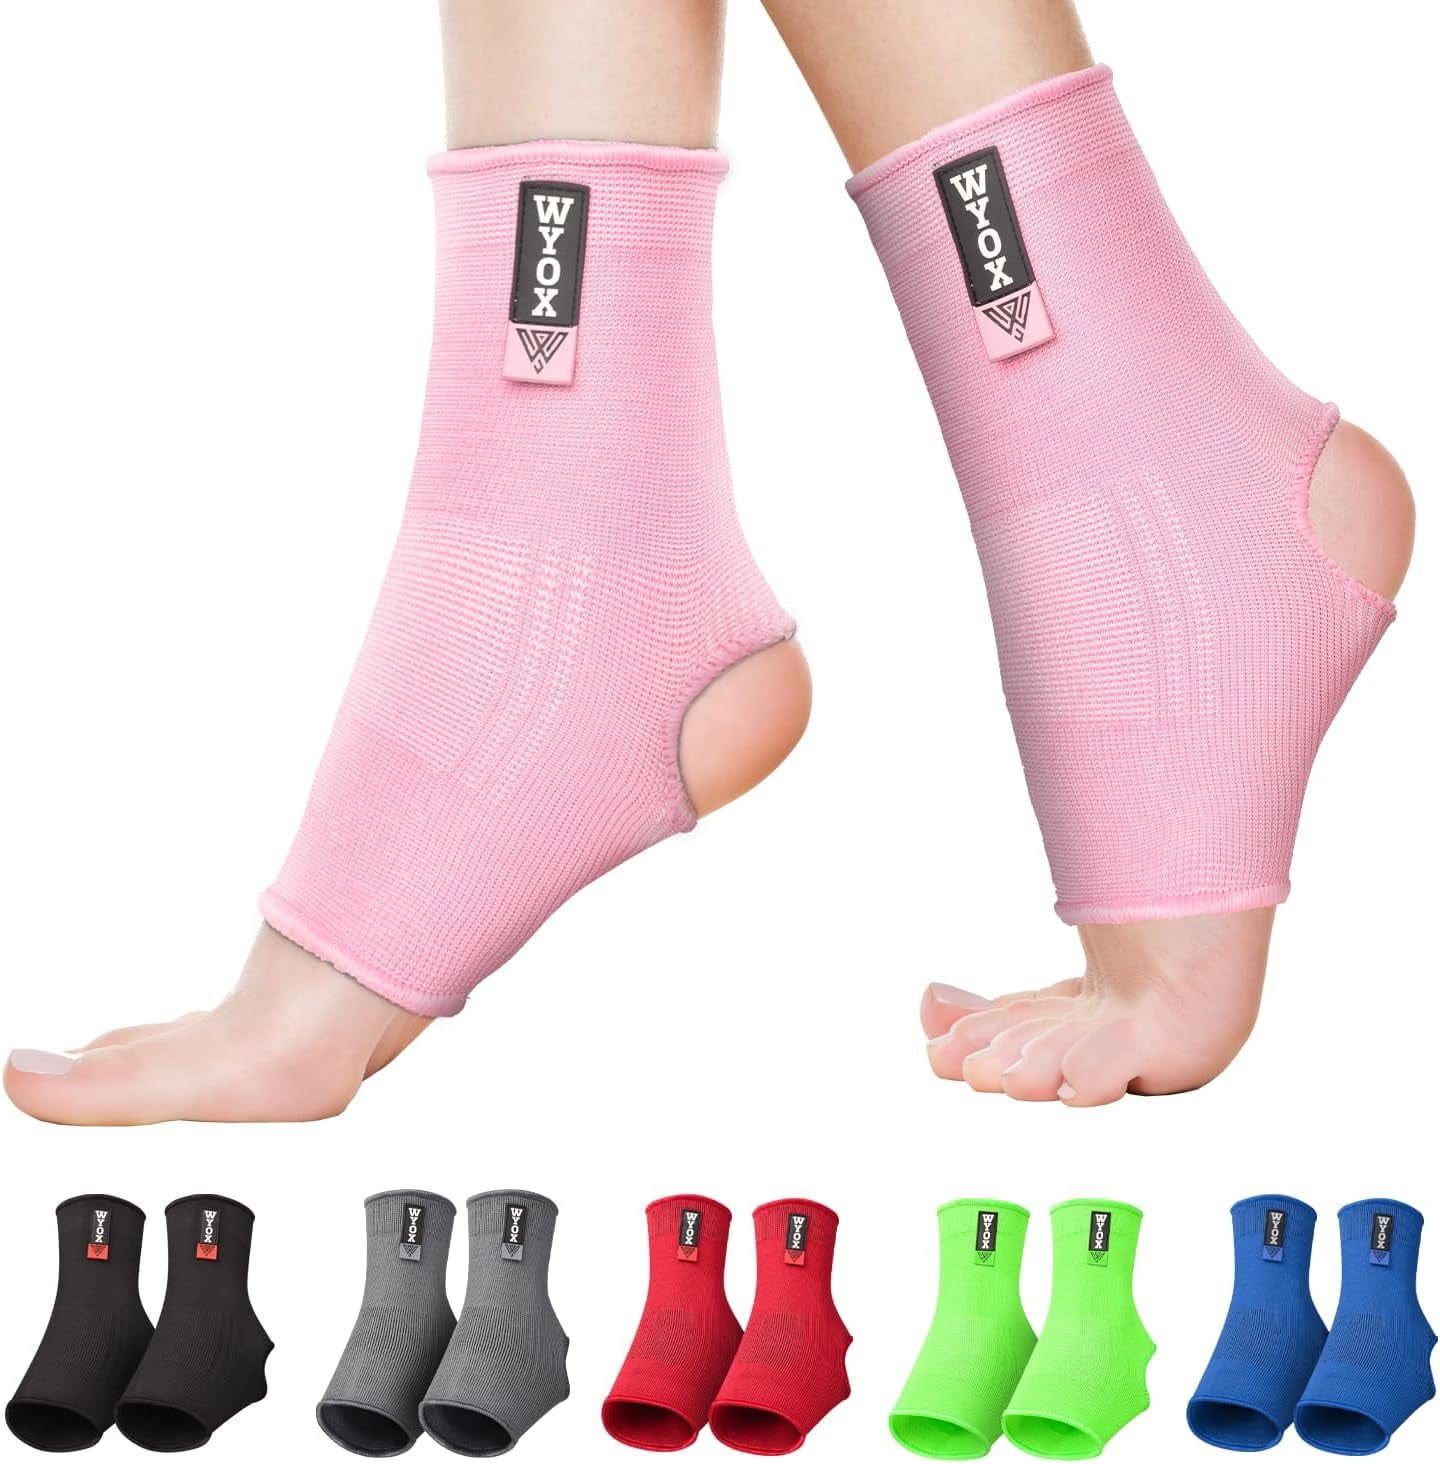 WYOX Ankle Wraps Support Boxing Gear for Men Women Muay Thai Ankle Support  Kickboxing Wraps Gym Ankle Support (Pair) (Pink, L/XL) 